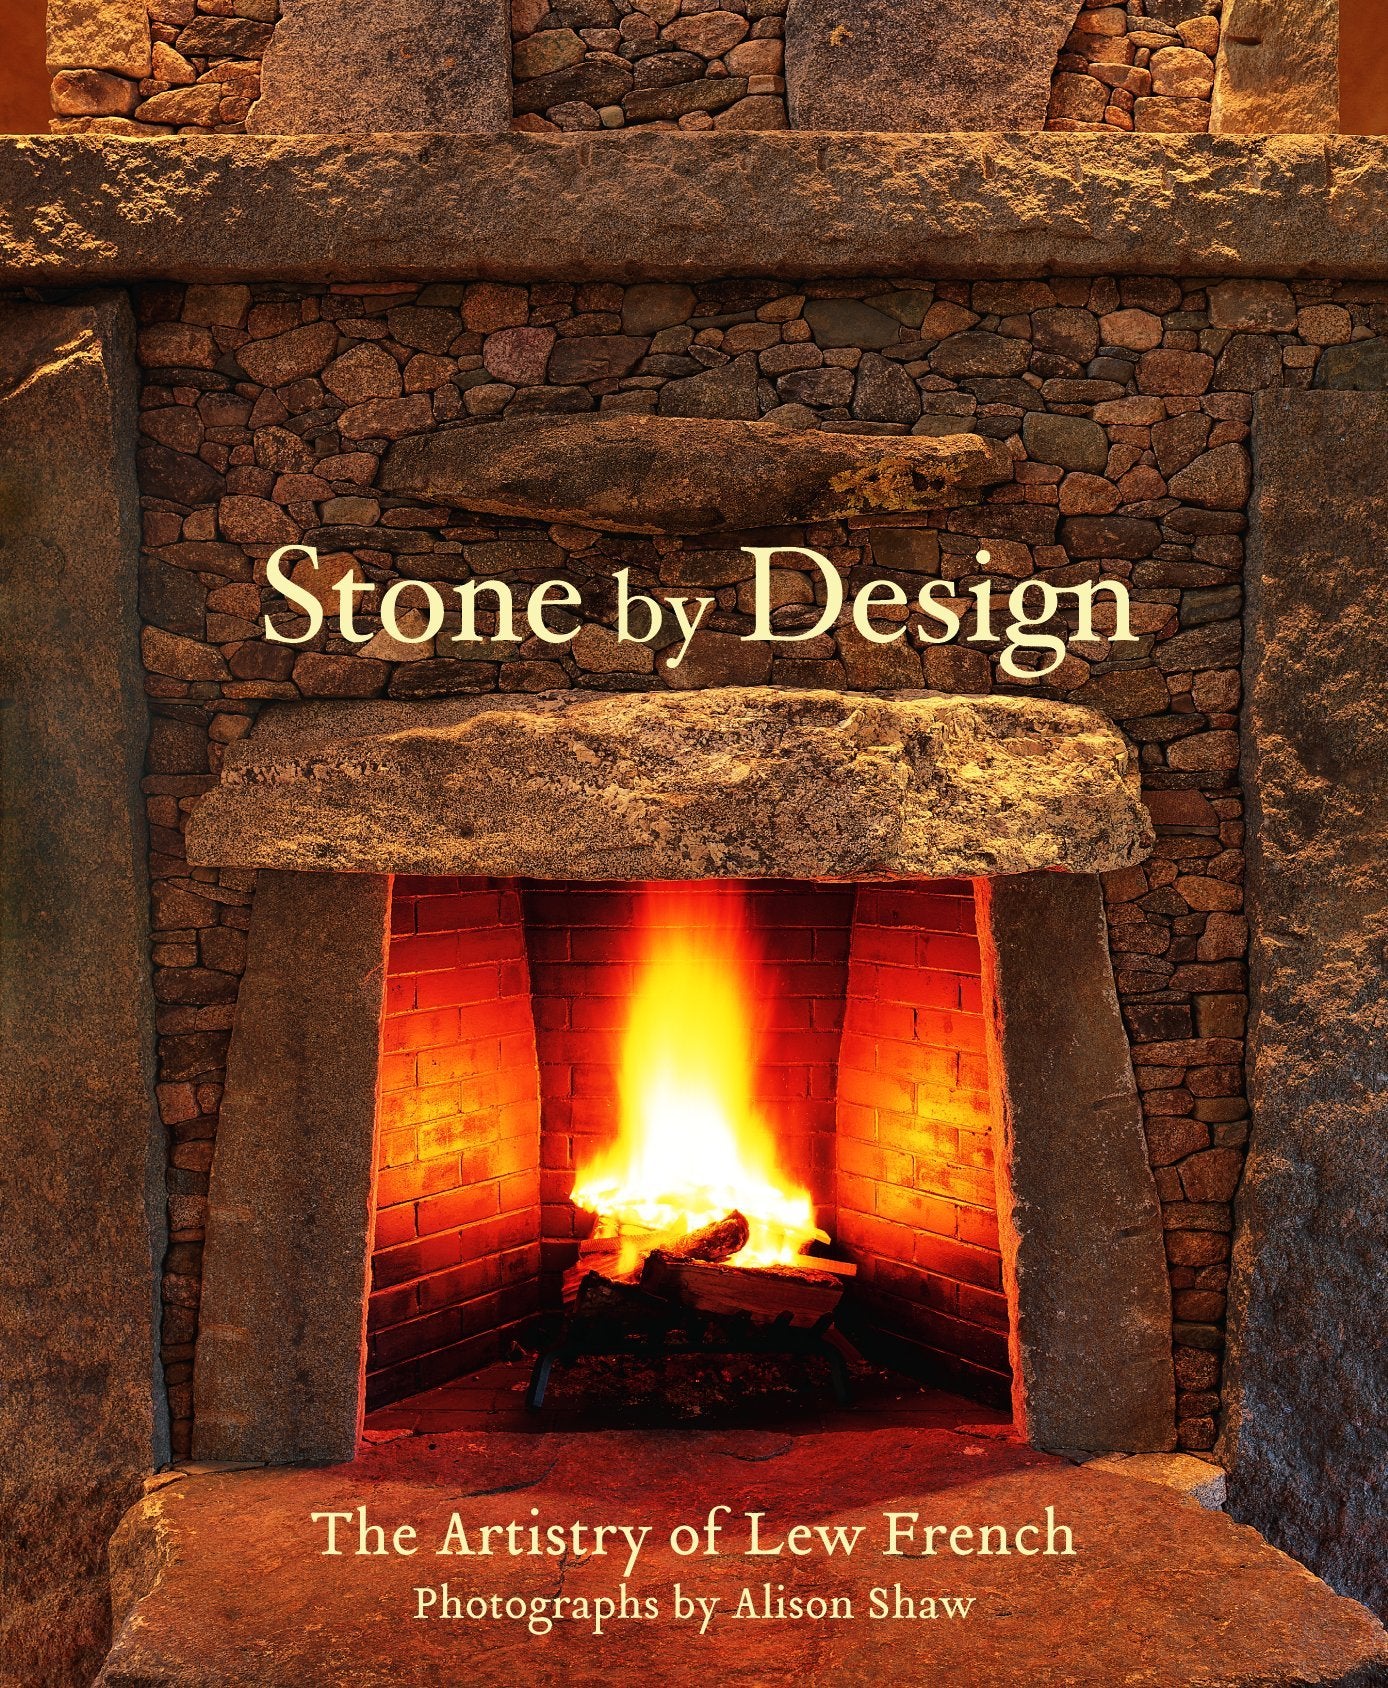 Stone by Design: The Artistry of Lew French